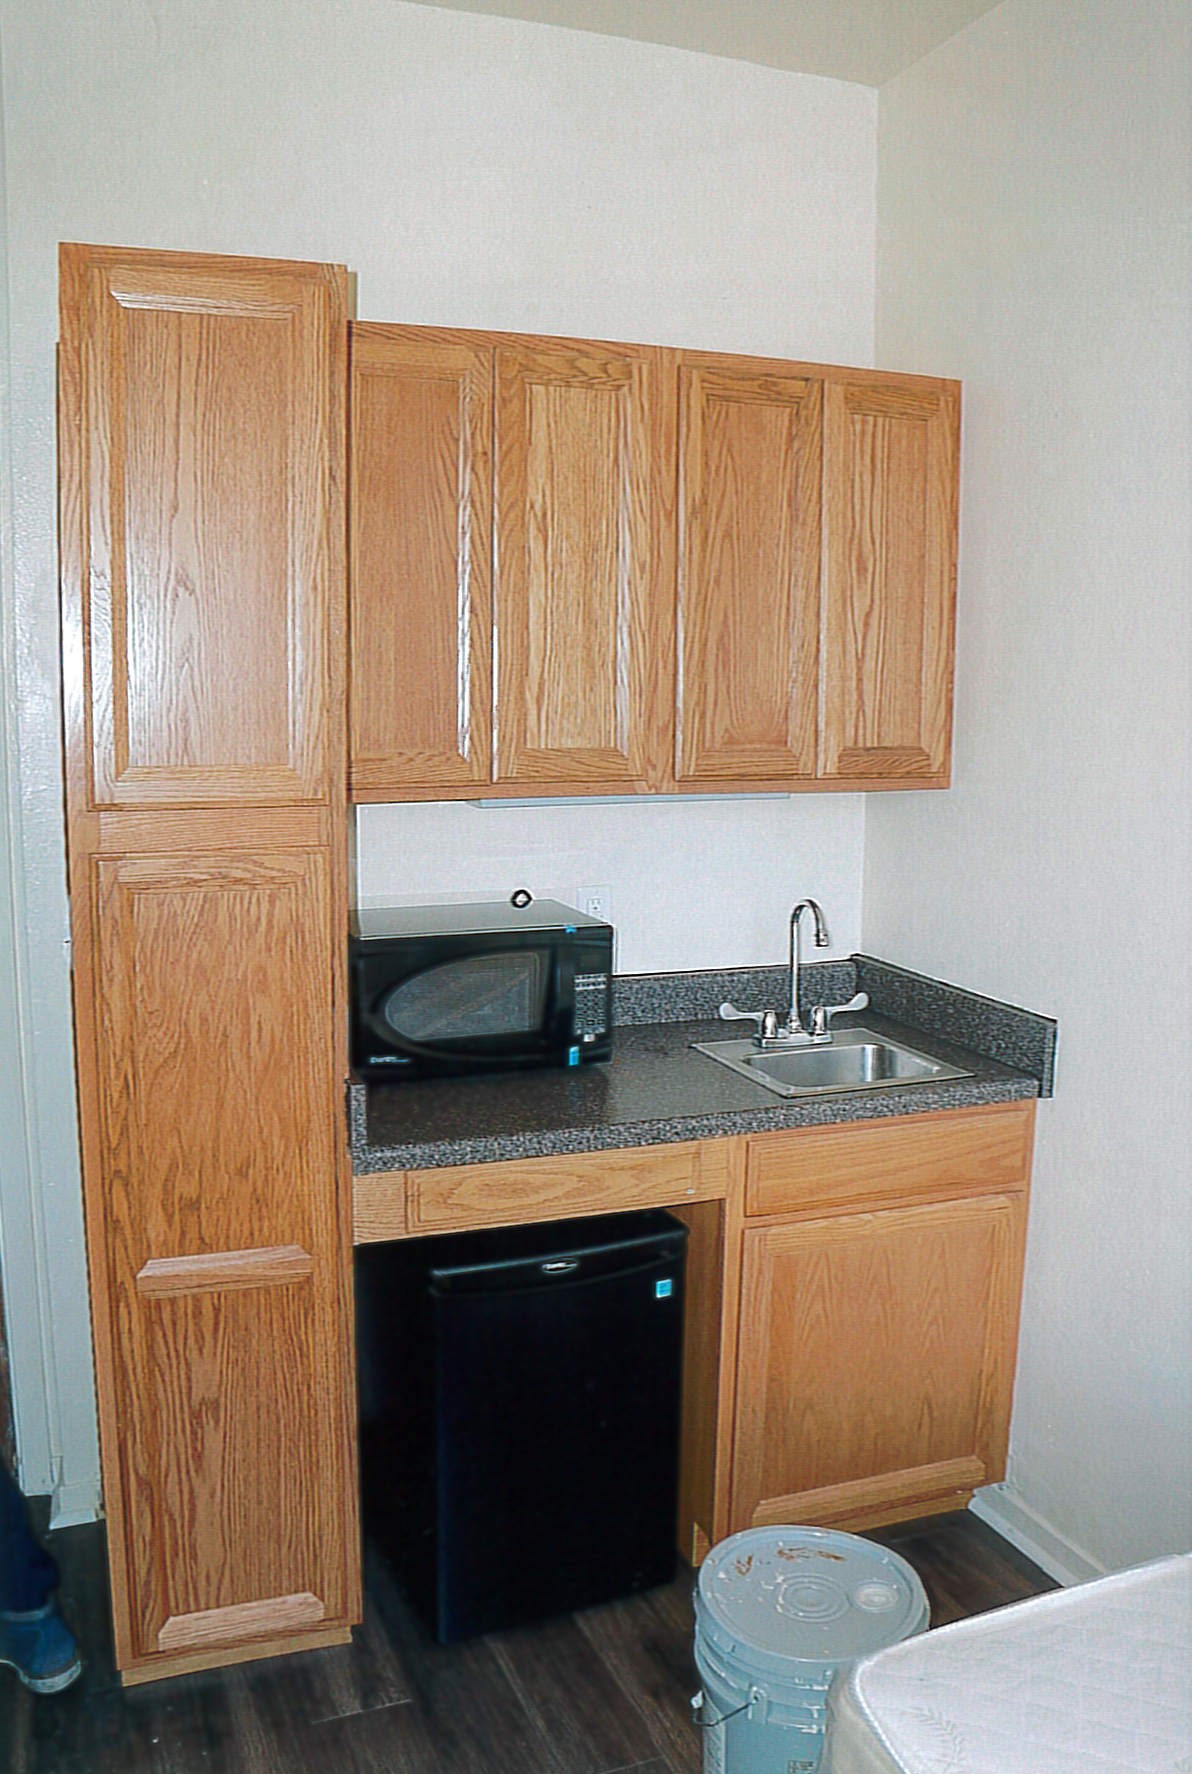 Typical residential kitchenette